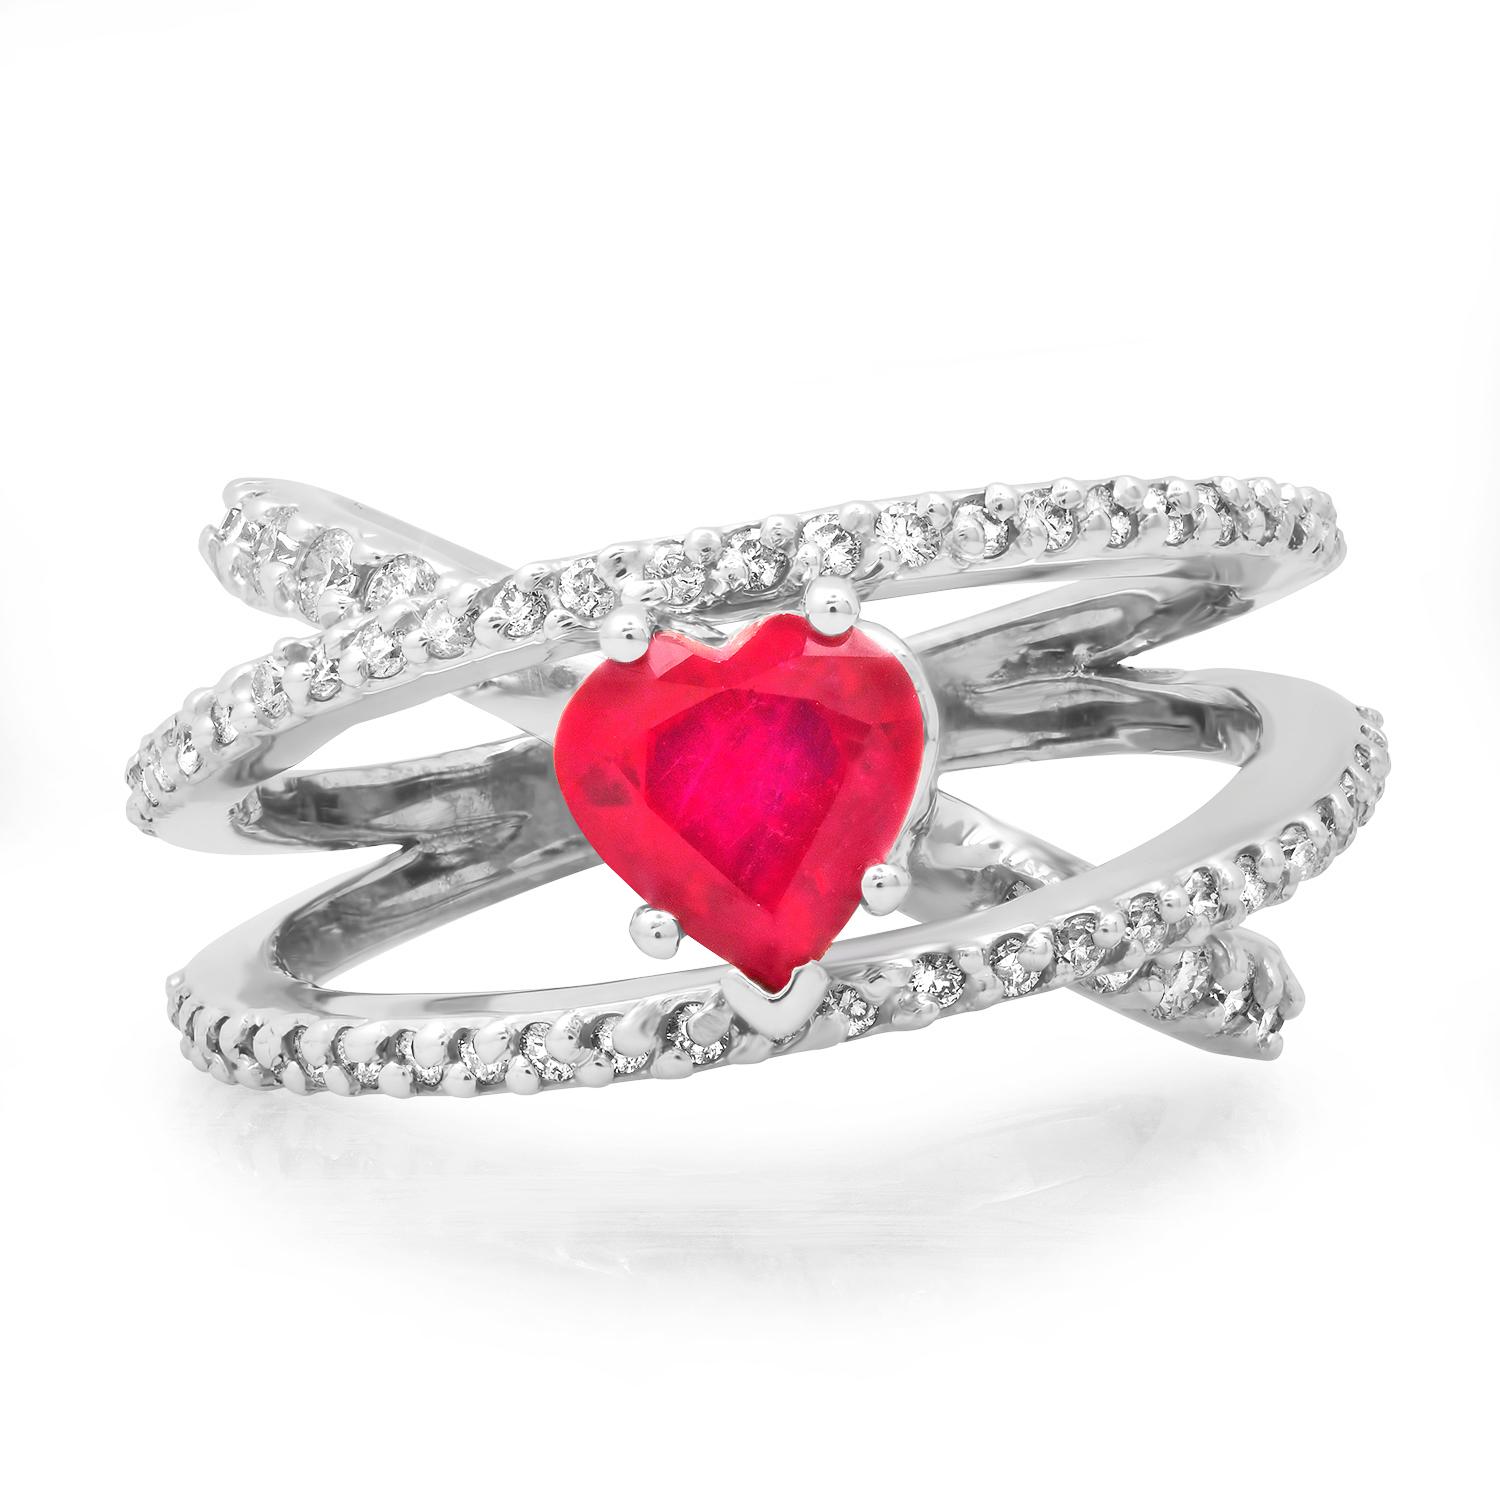 18K White Gold Setting with 1.47ct Heart shapped Ruby and 0.90ct Diamond Ring